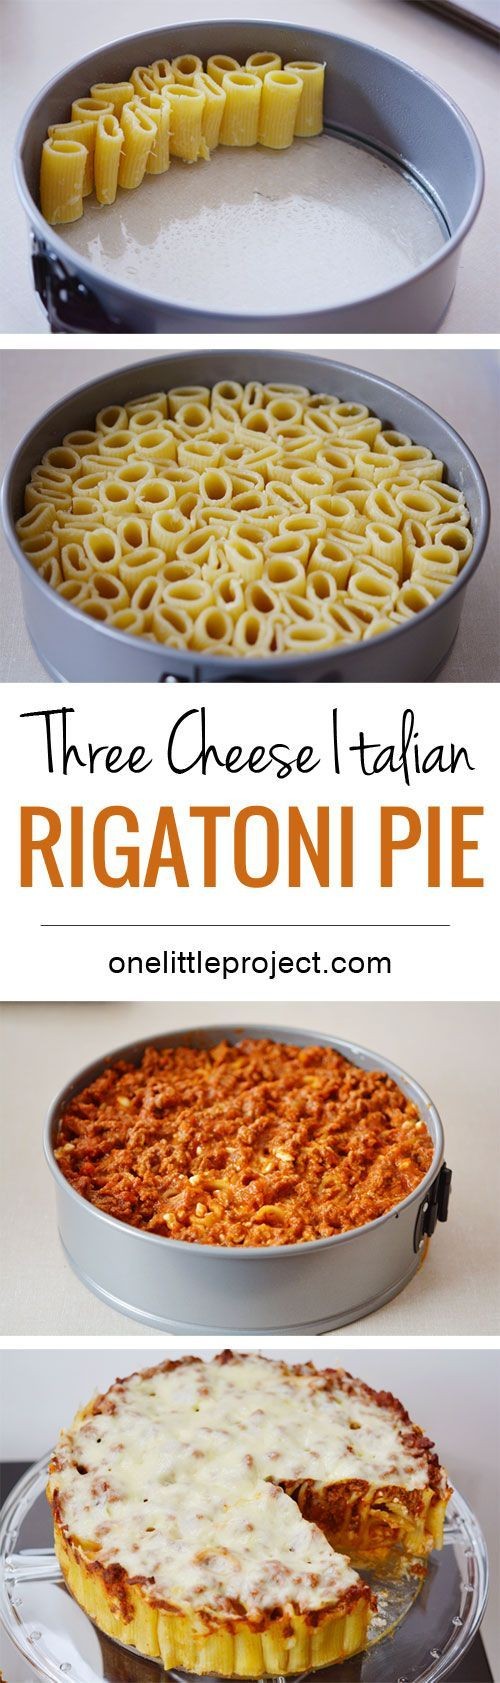 How fun is this? Stand up rigatoni noodles in a sp...